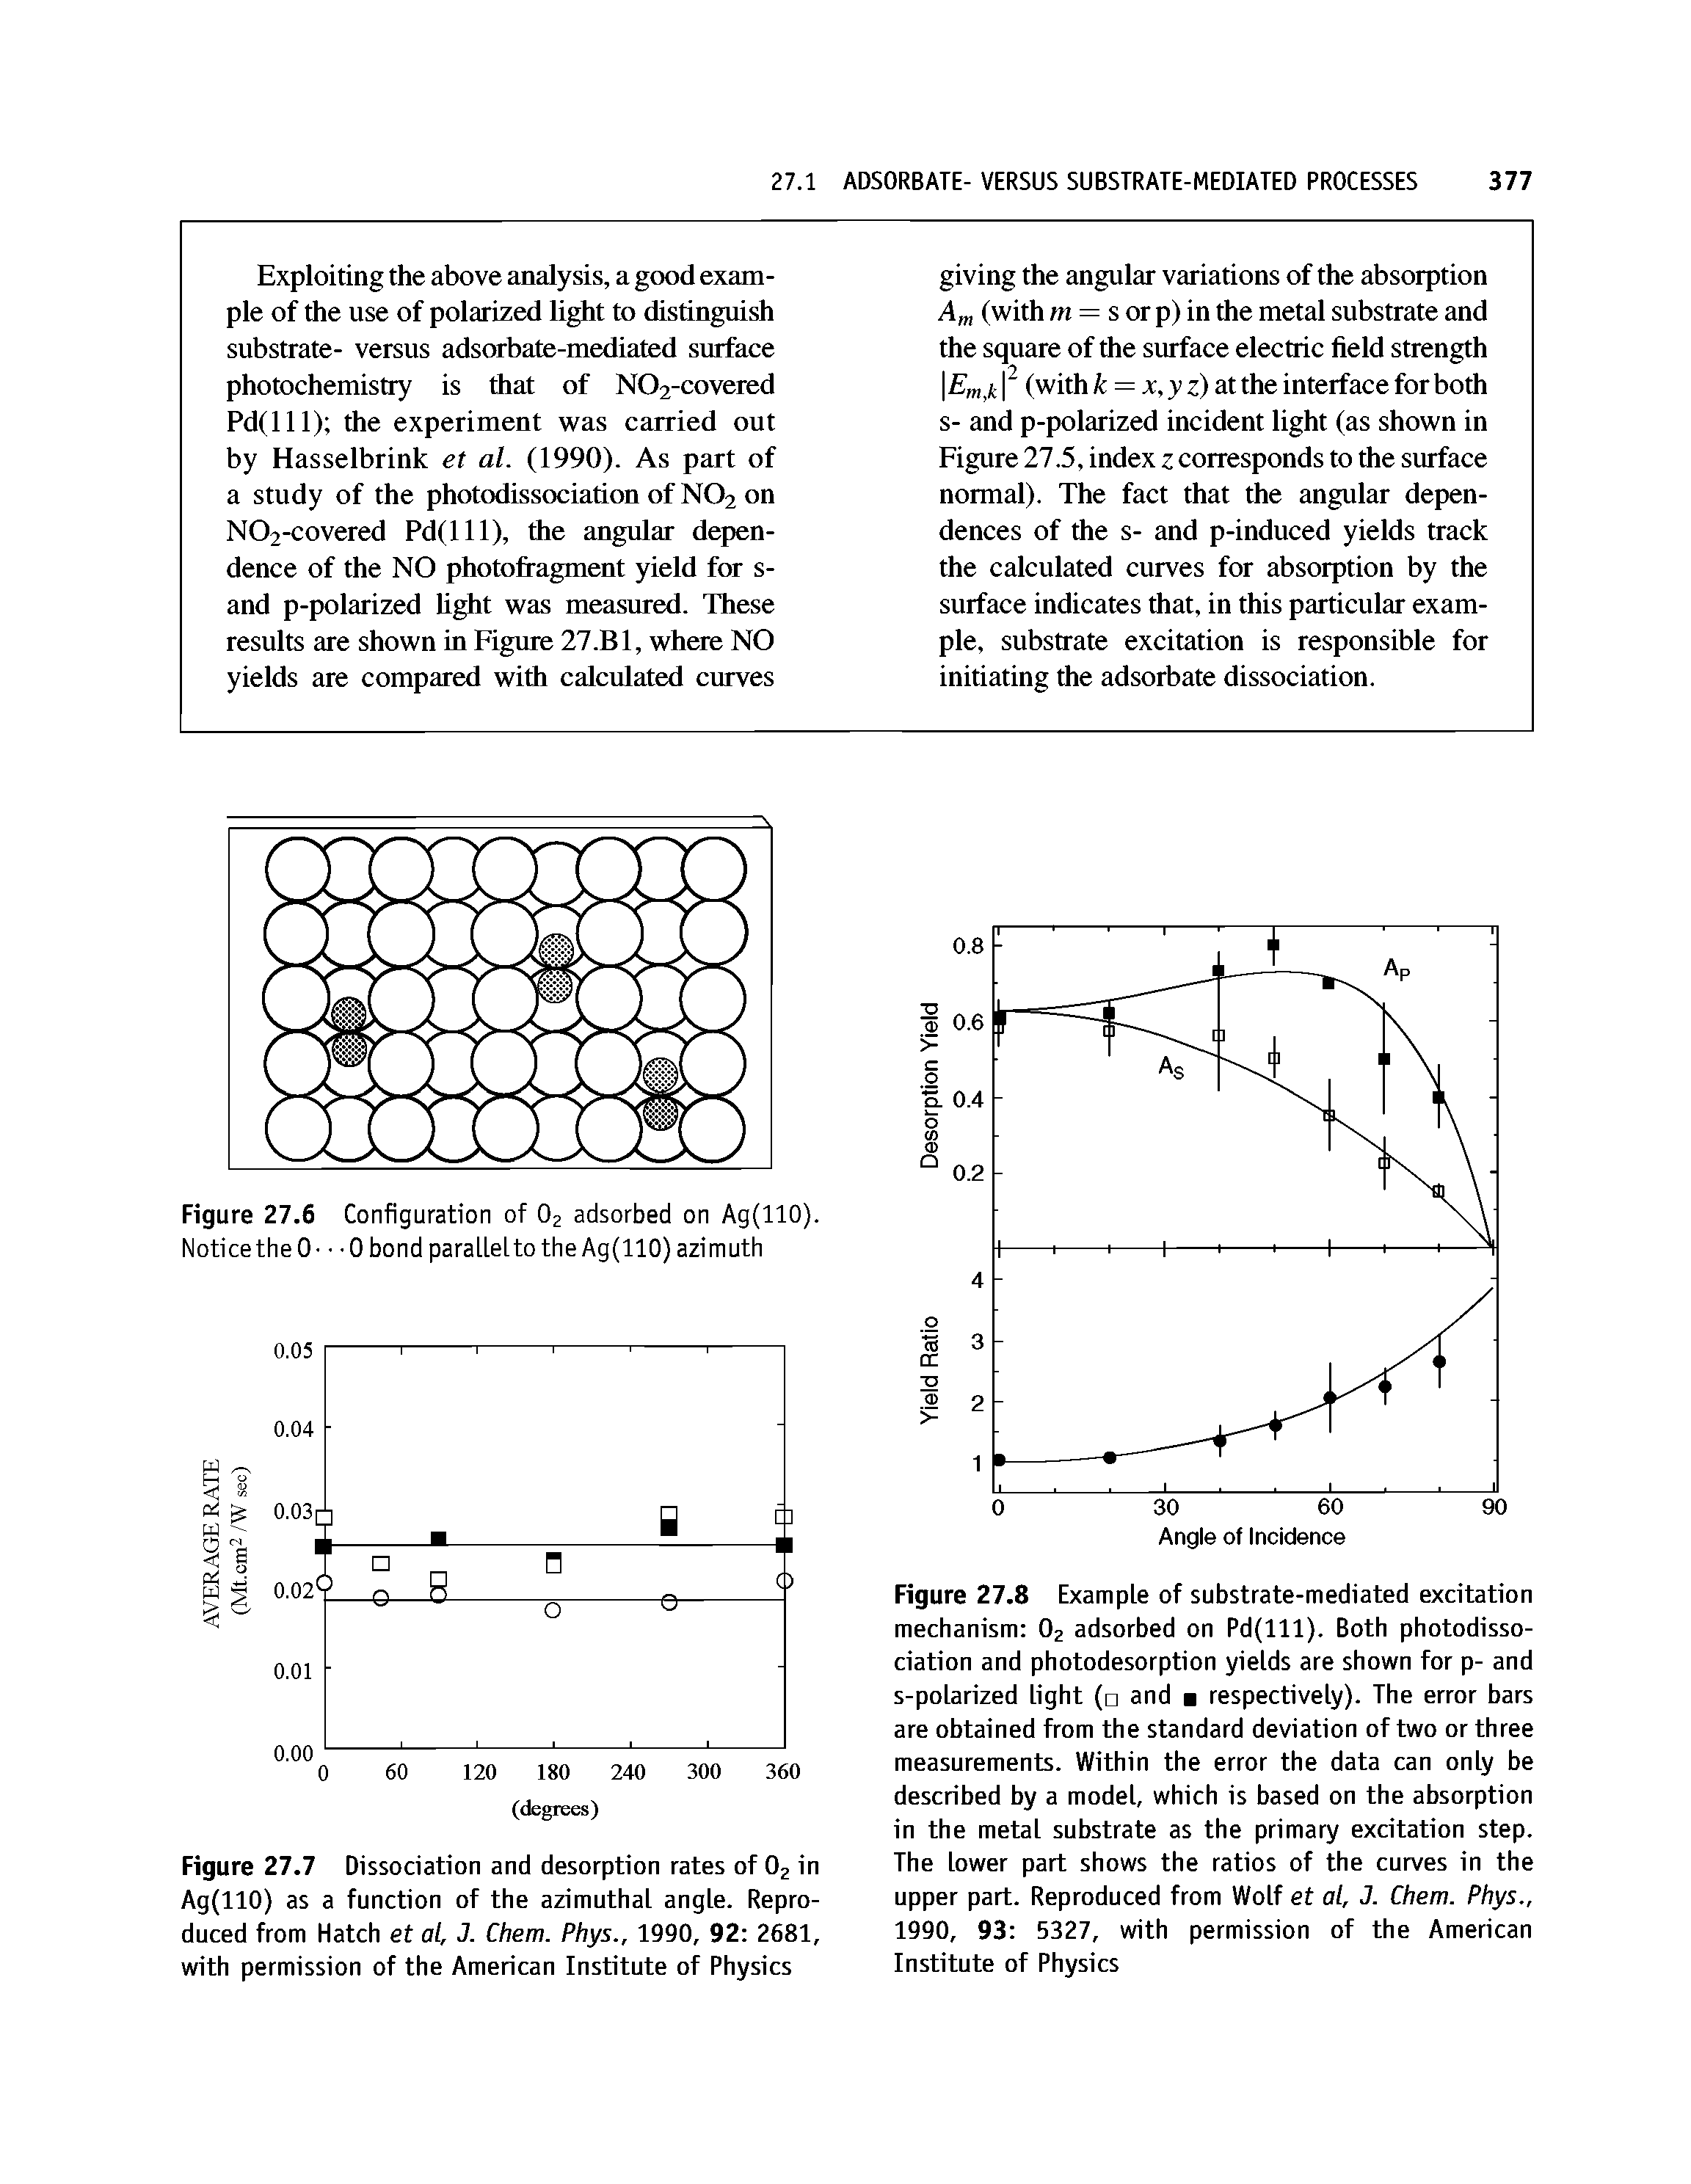 Figure 27.8 Example of substrate-mediated excitation mechanism O2 adsorbed on Pd(lll). Both photodissociation and photodesorption yields are shown for p- and s-polarized light ( and respectively). The error bars are obtained from the standard deviation of two or three measurements. Within the error the data can only be described by a model, which is based on the absorption in the metal substrate as the primary excitation step. The lower part shows the ratios of the curves in the upper part. Reproduced from Wolf et al, J. Chem. Phys., 1990, 93 5327, with permission of the American Institute of Physics...